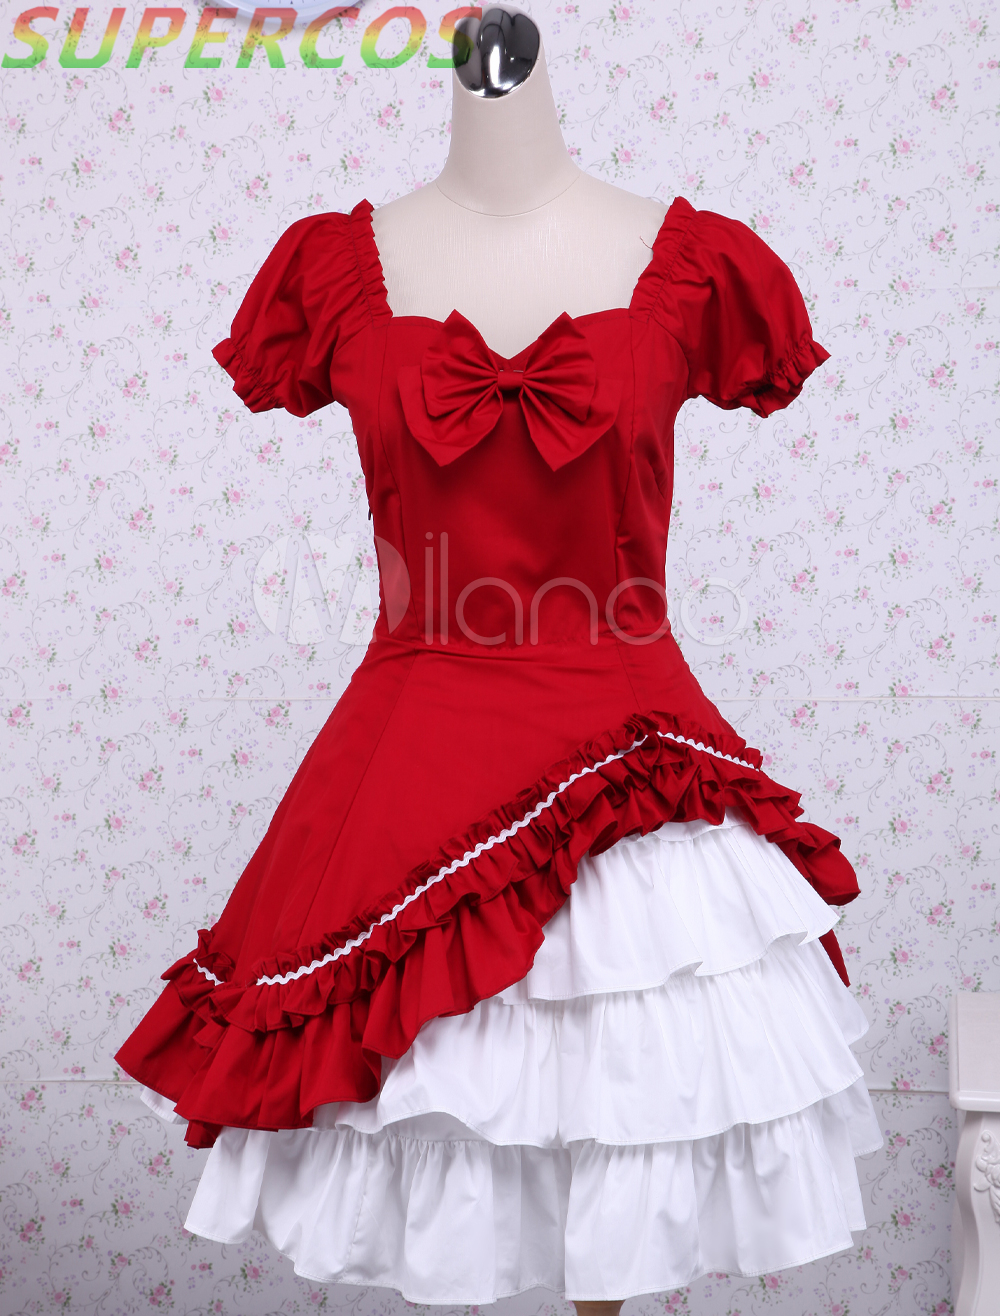 Free shipping! New Arrivals! High Quality! Cotton Red Lolita Two-layer Bow Classic Lolita Dress